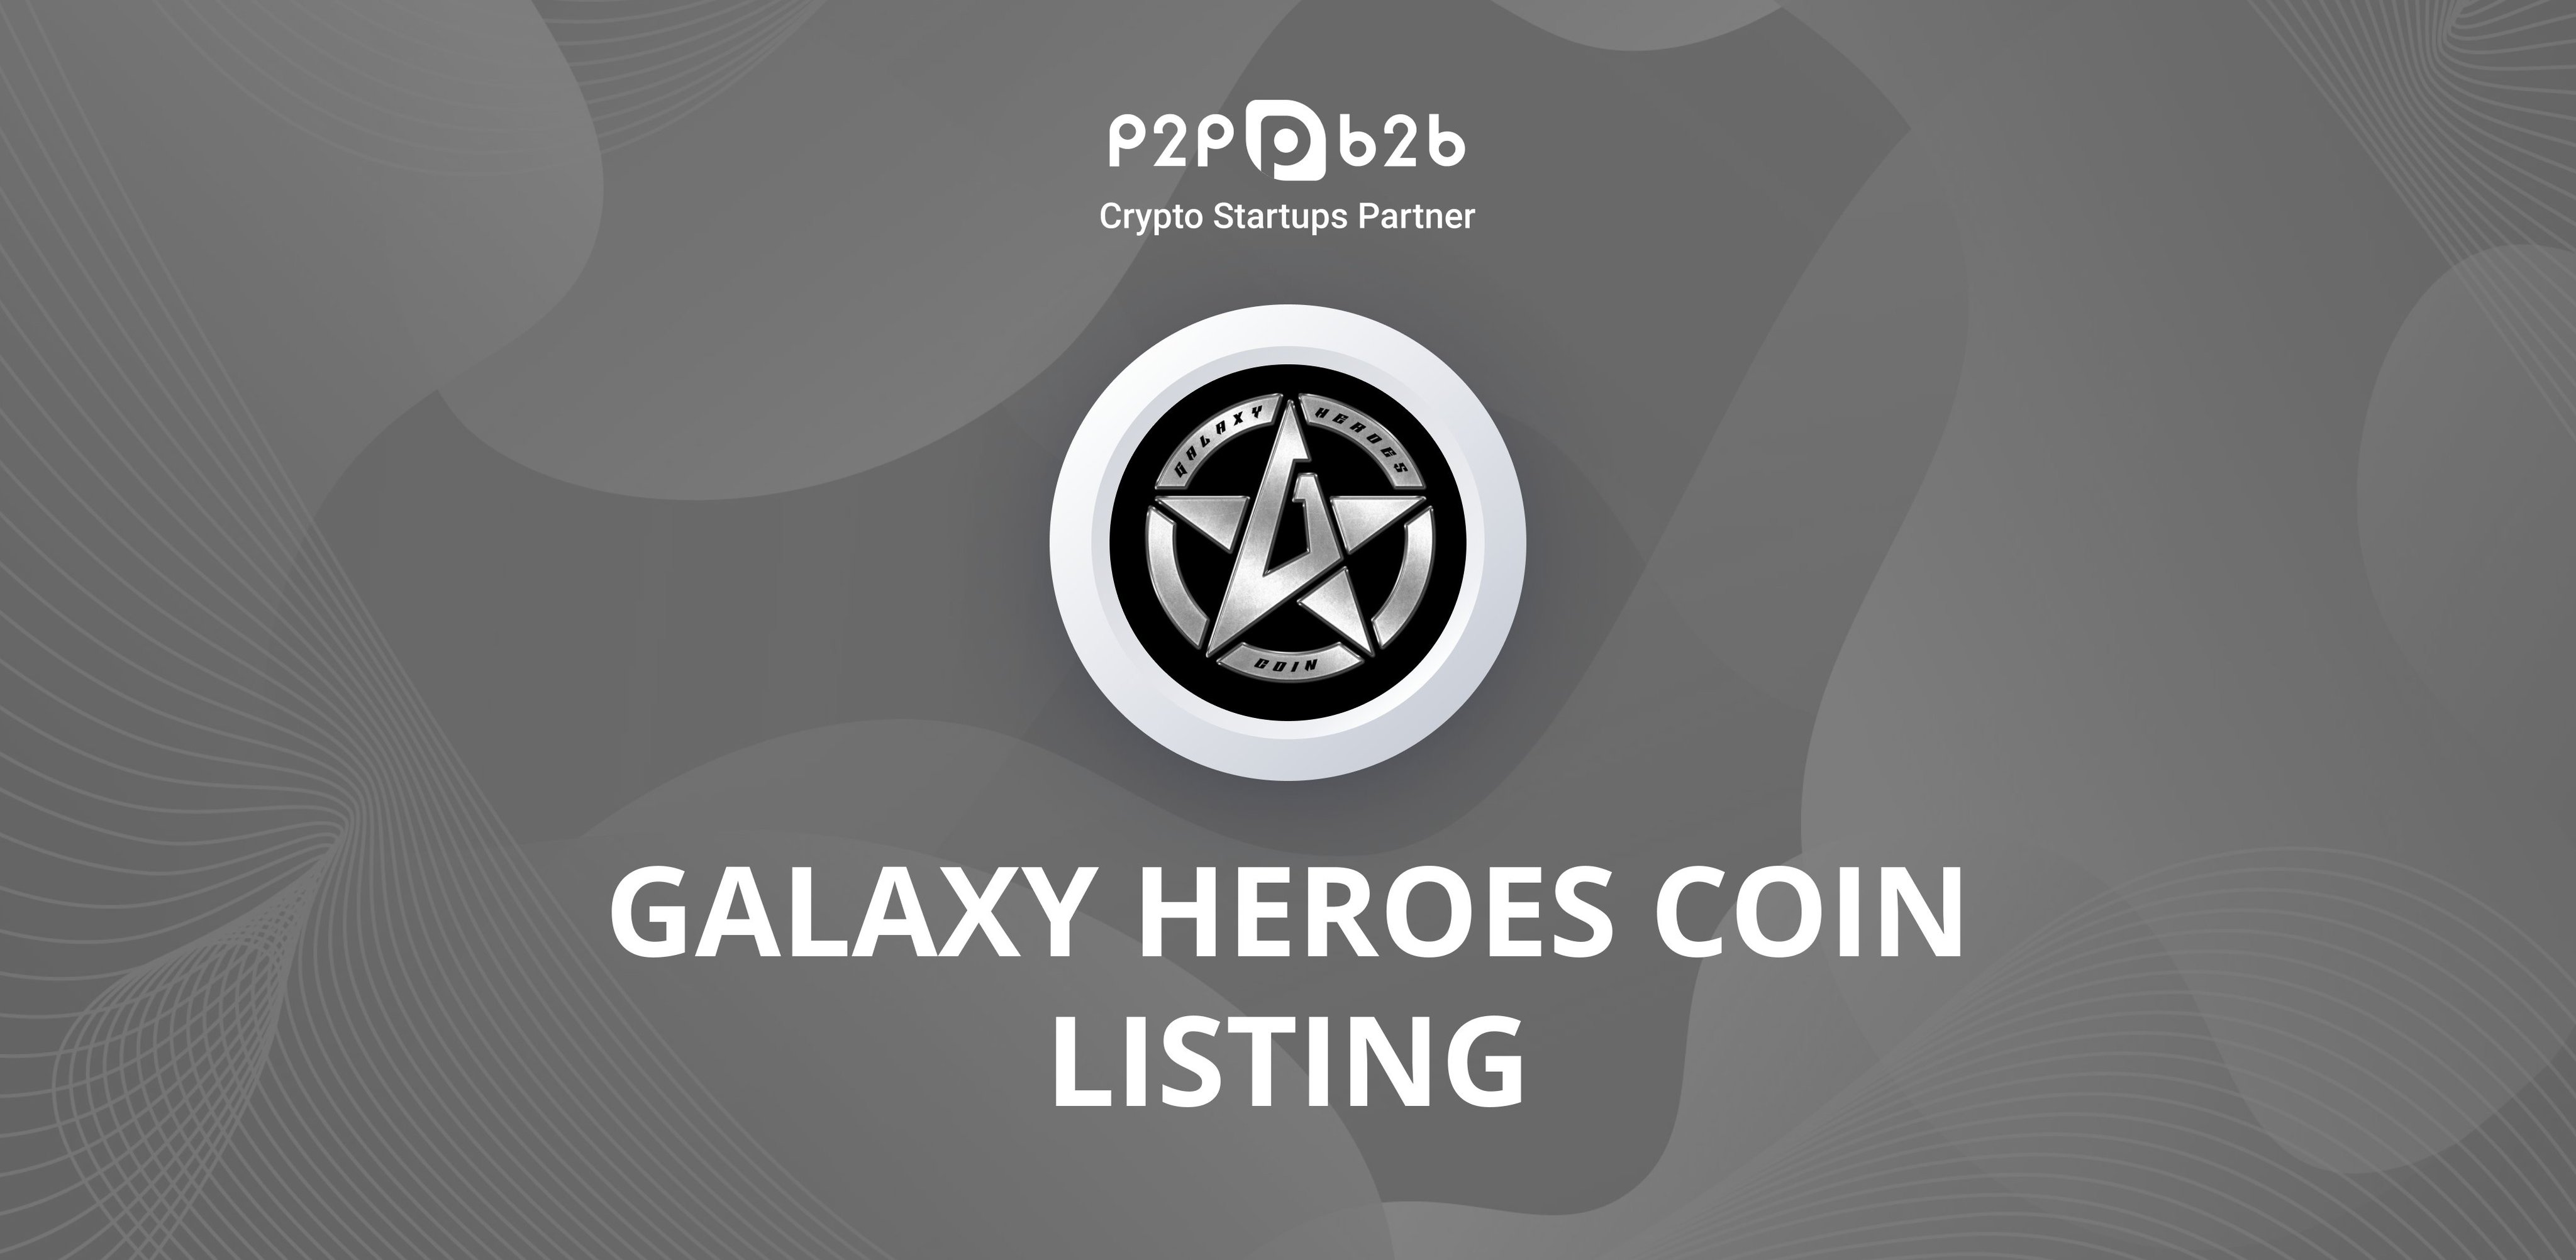 "Galaxy Heroes Coin has been listed on P2PB2B GHC is using the Binance Smart Chain